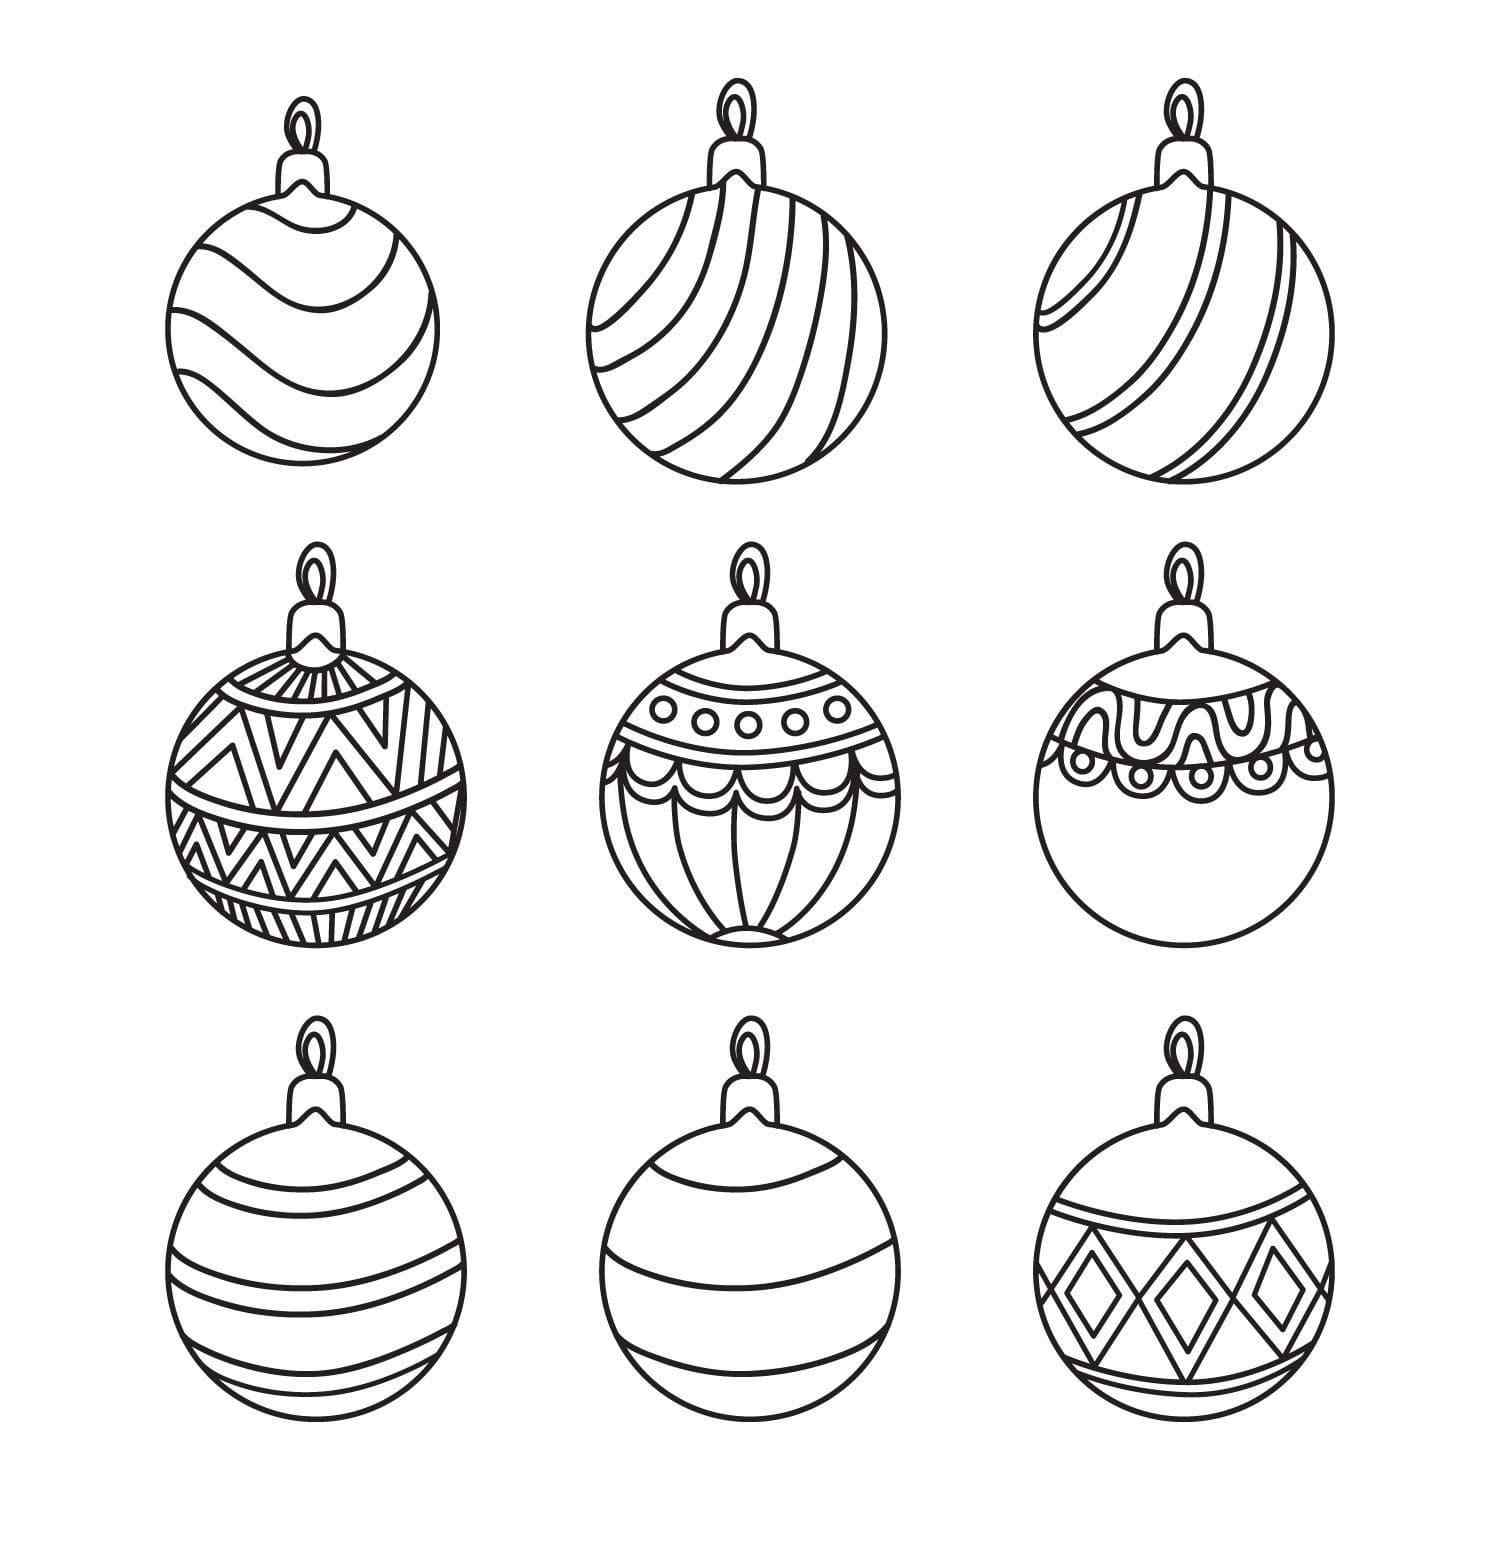 Completely different Christmas Balls Coloring Page